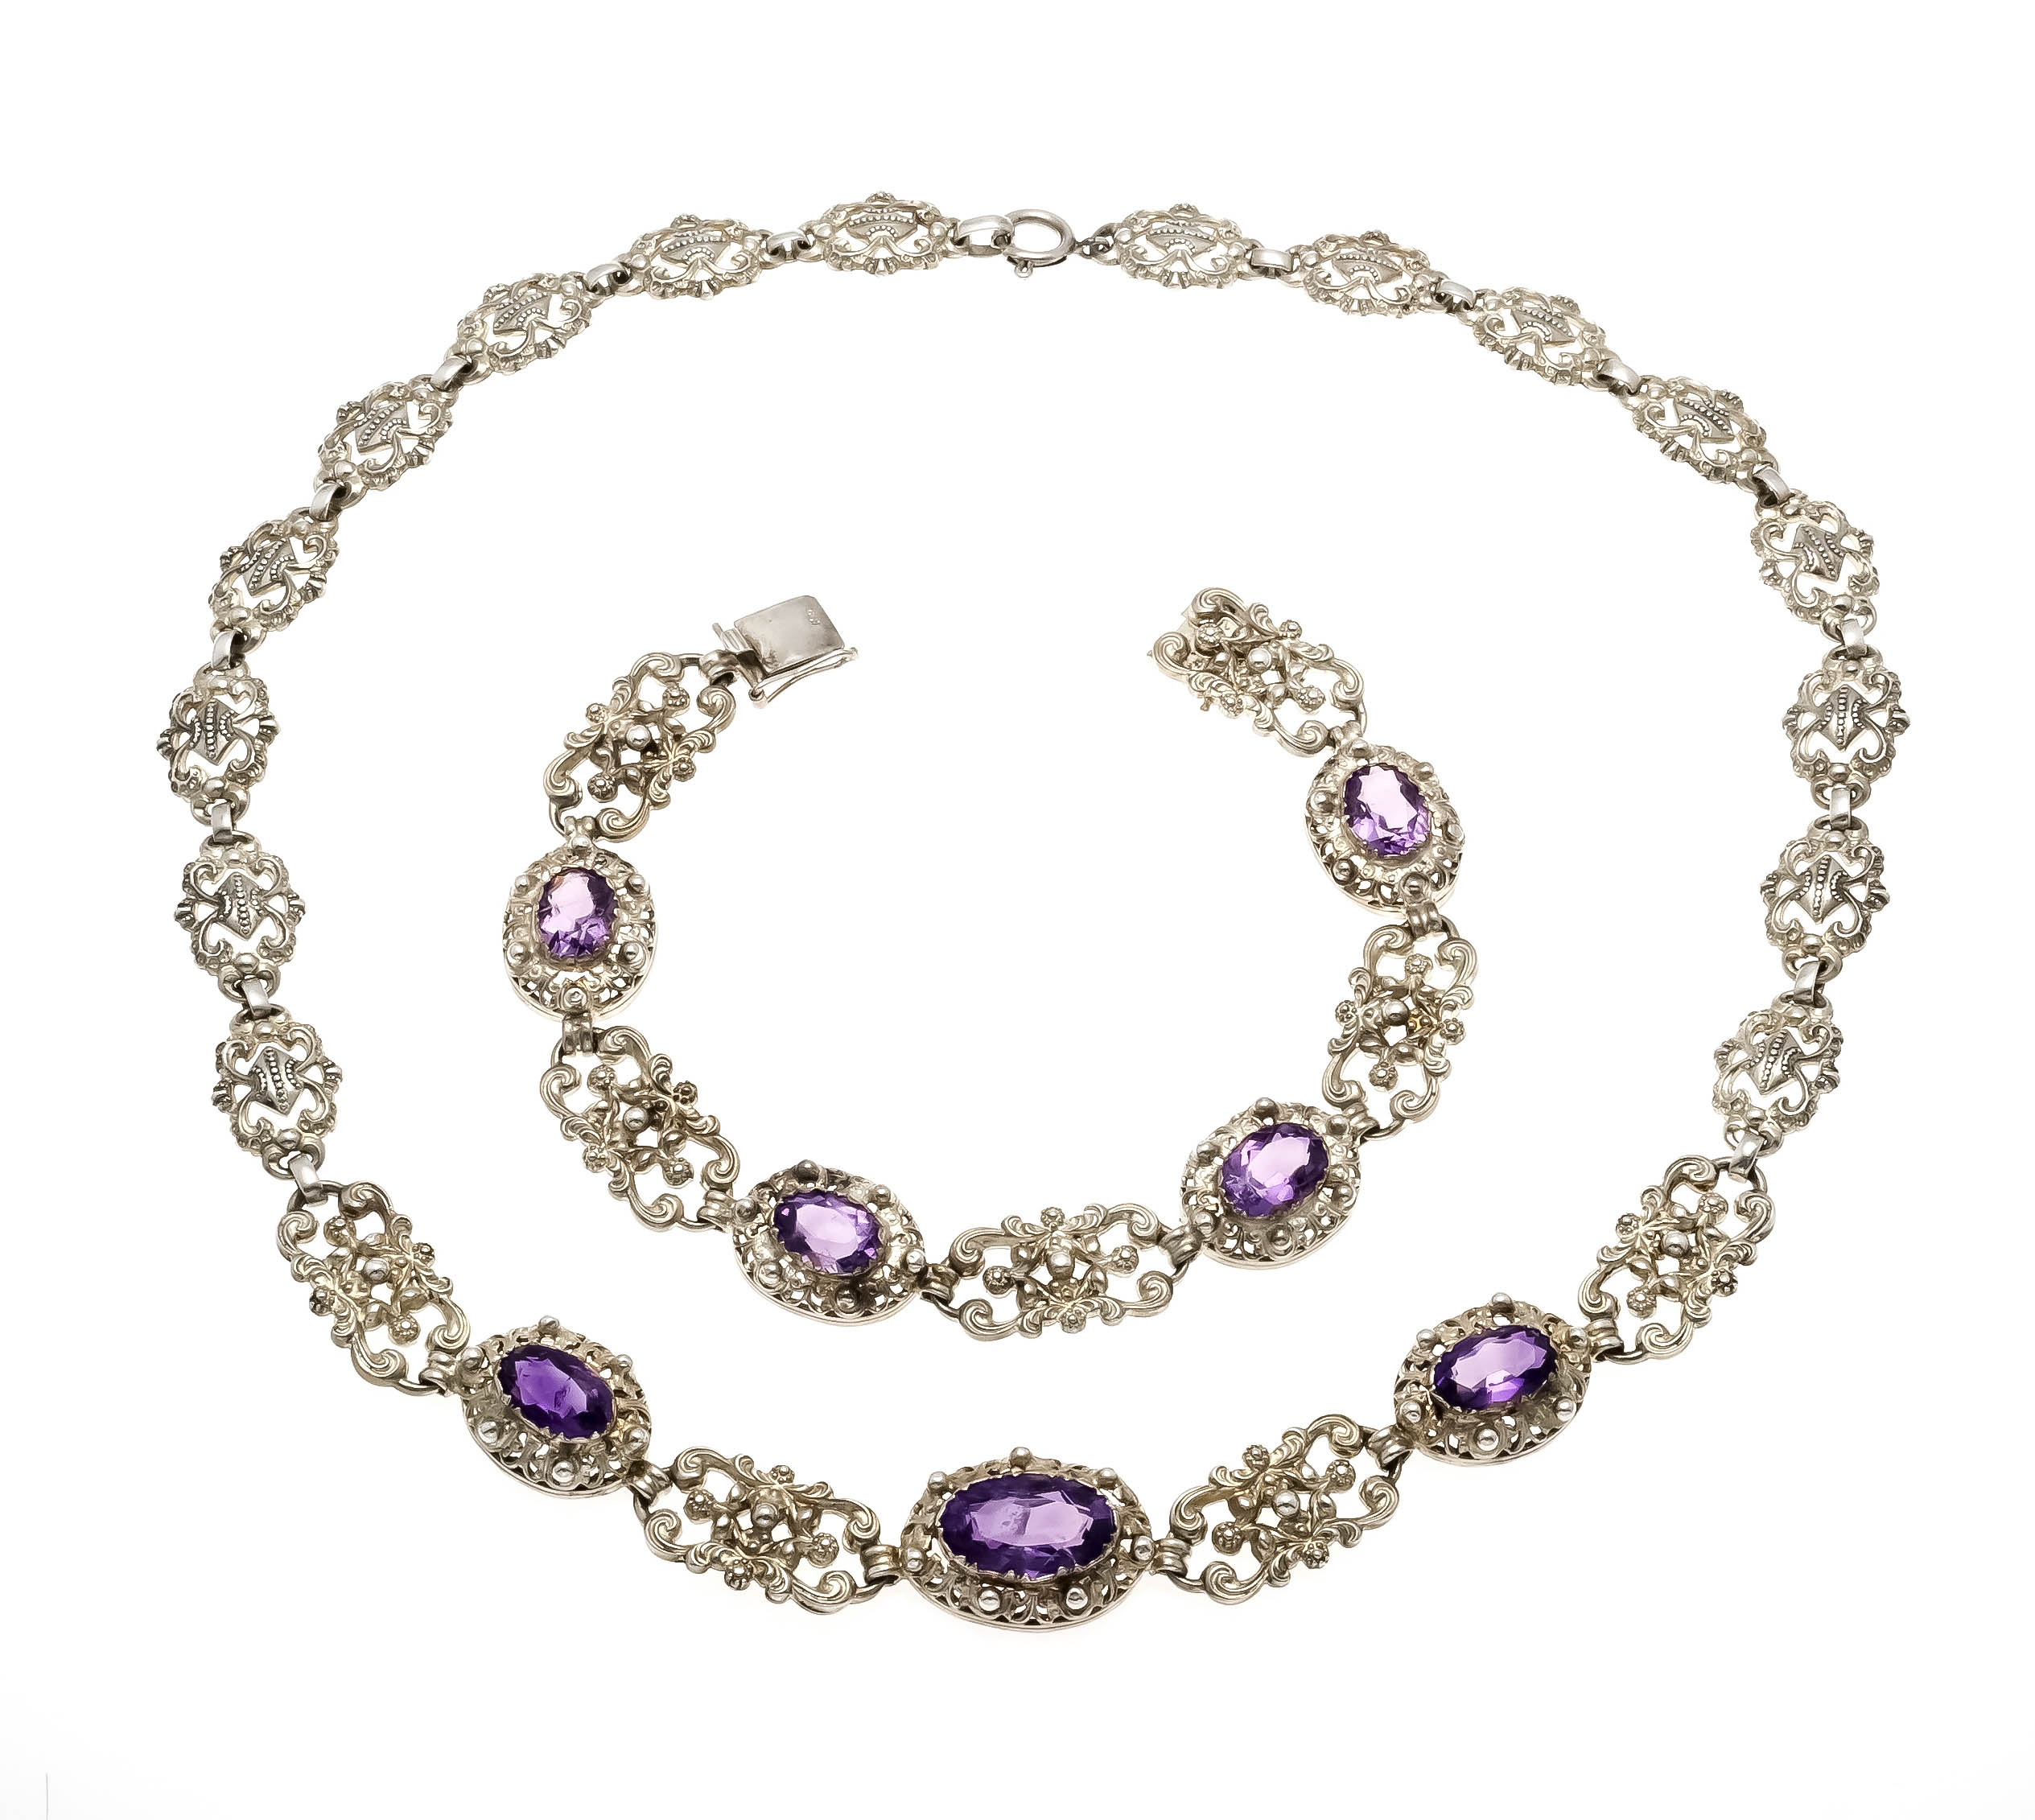 2-piece amethyst set, silver 830/000, made of richly decorated ornamental links in historicism